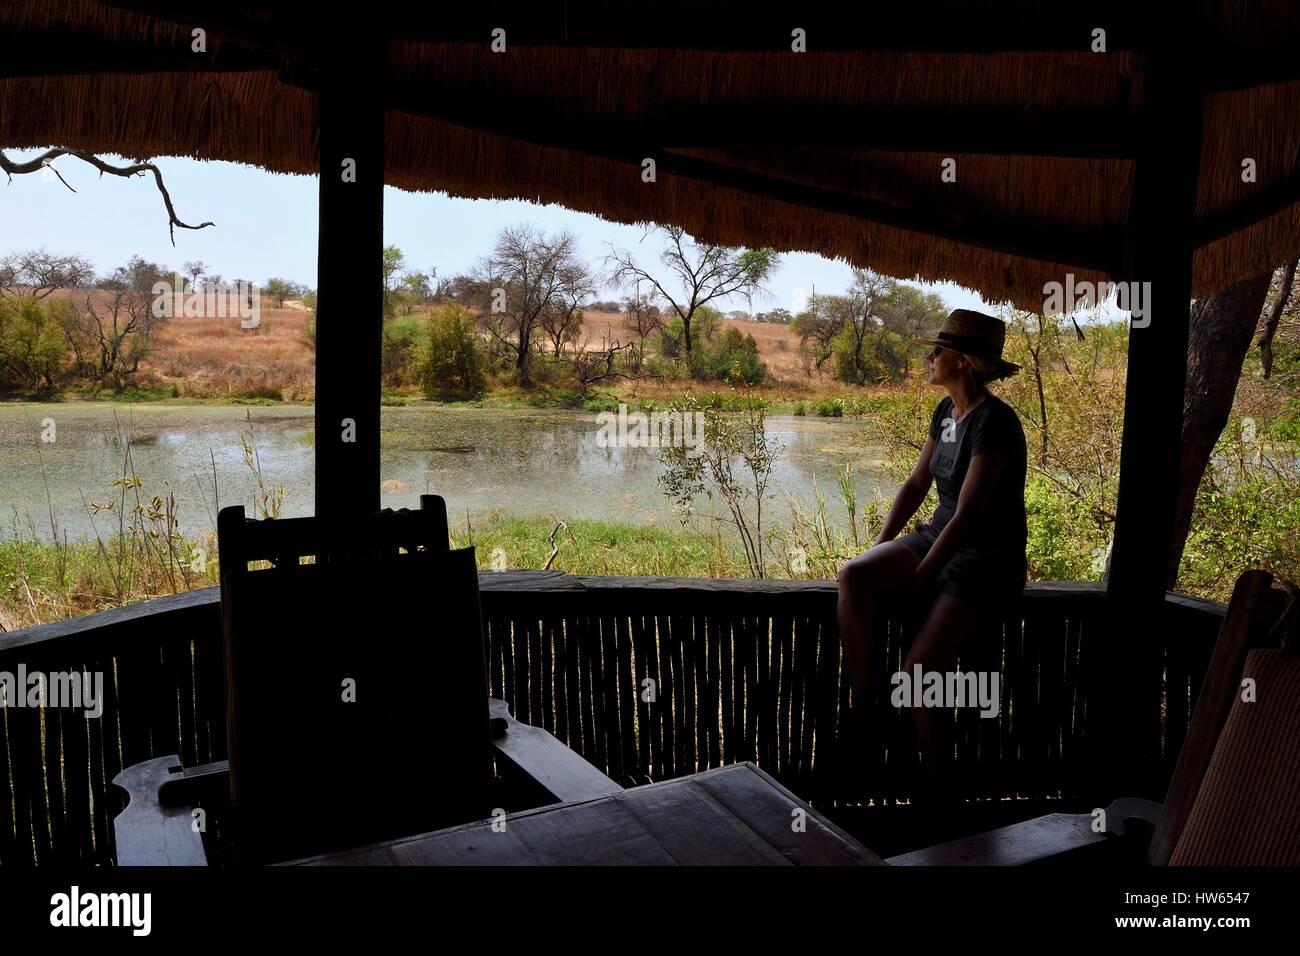 Zimbabwe, Midlands Province, Gweru, Antelope Park, terrace of a bungalow overlooking the pond Stock Photo